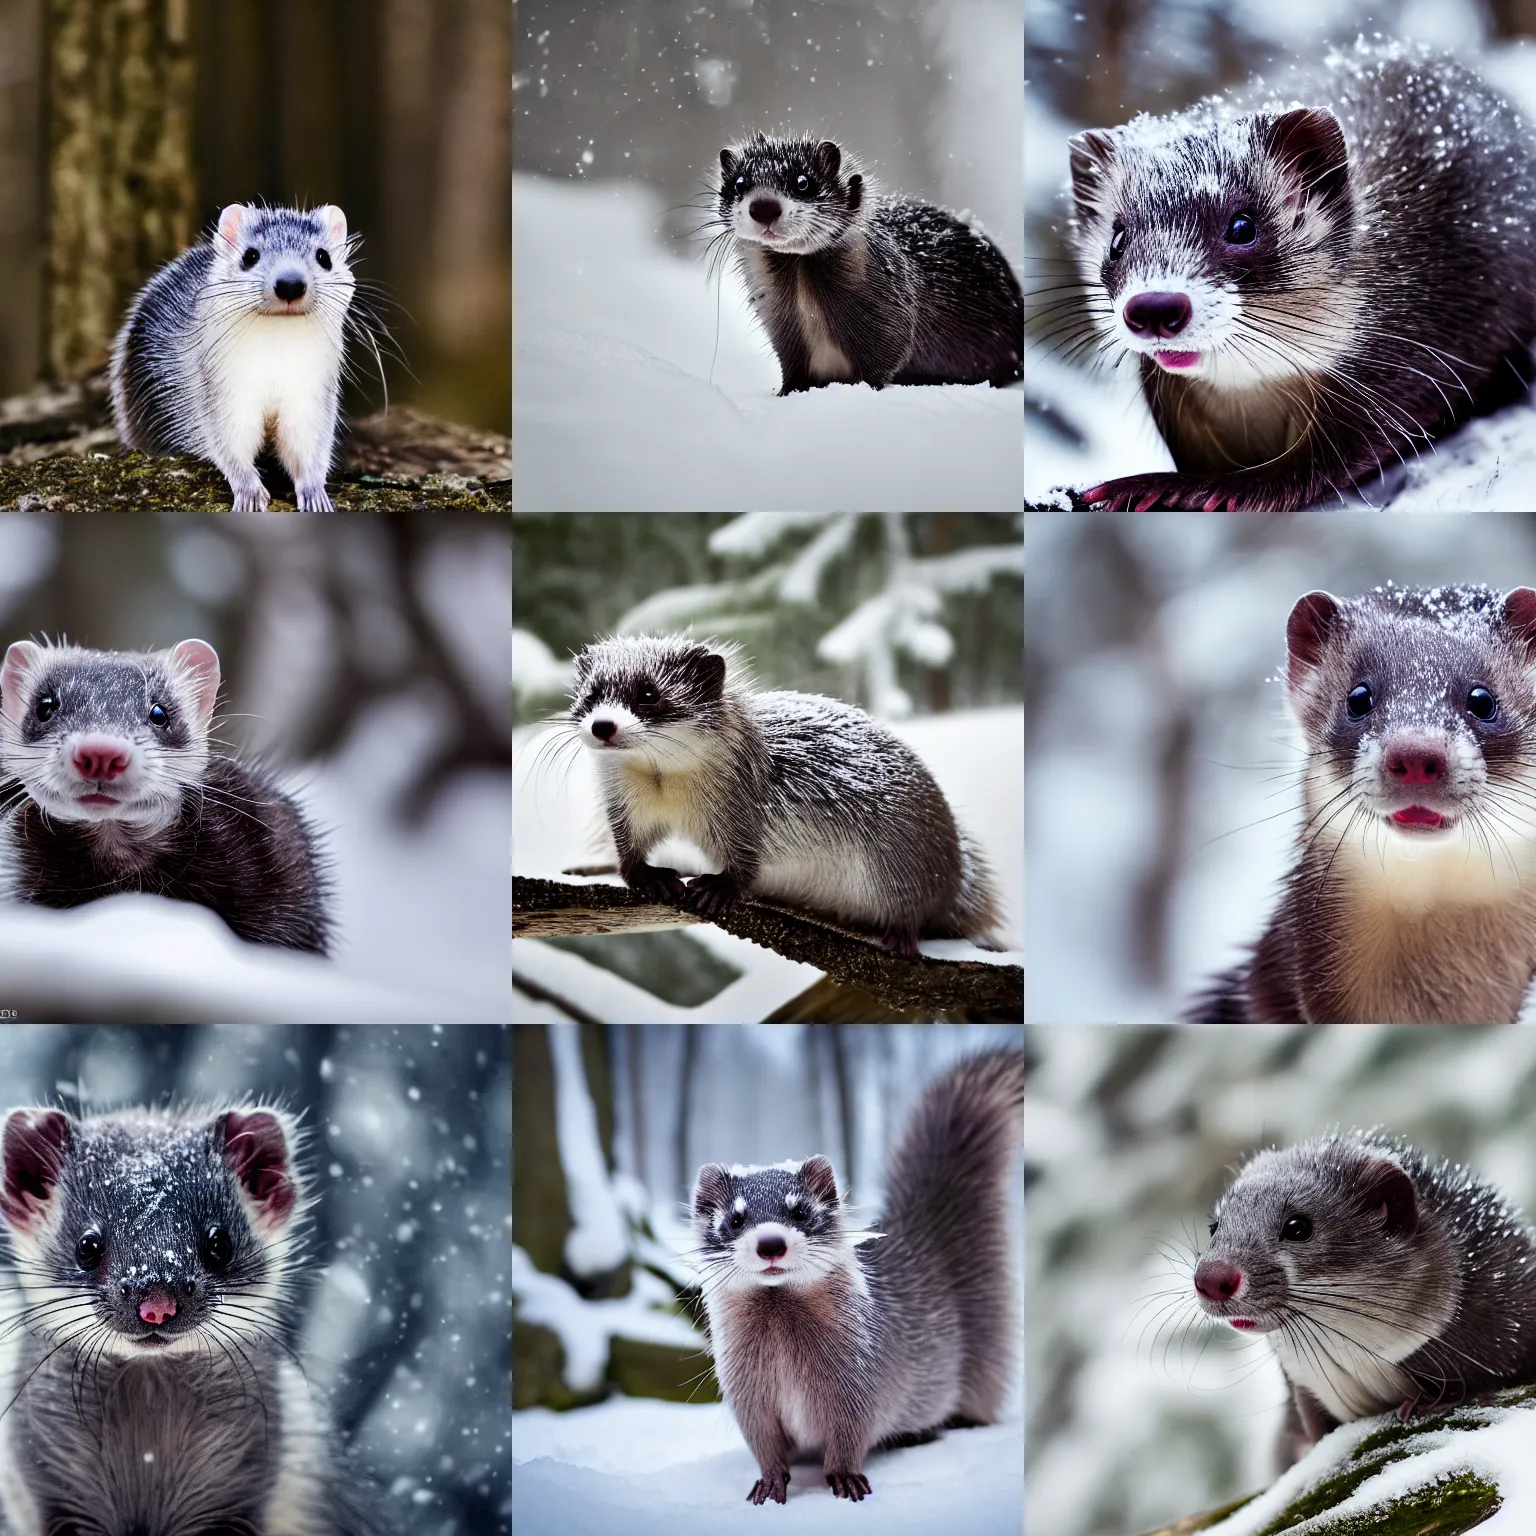 Prompt: Nature photo of a gray ferret in a snowy forest, dslr